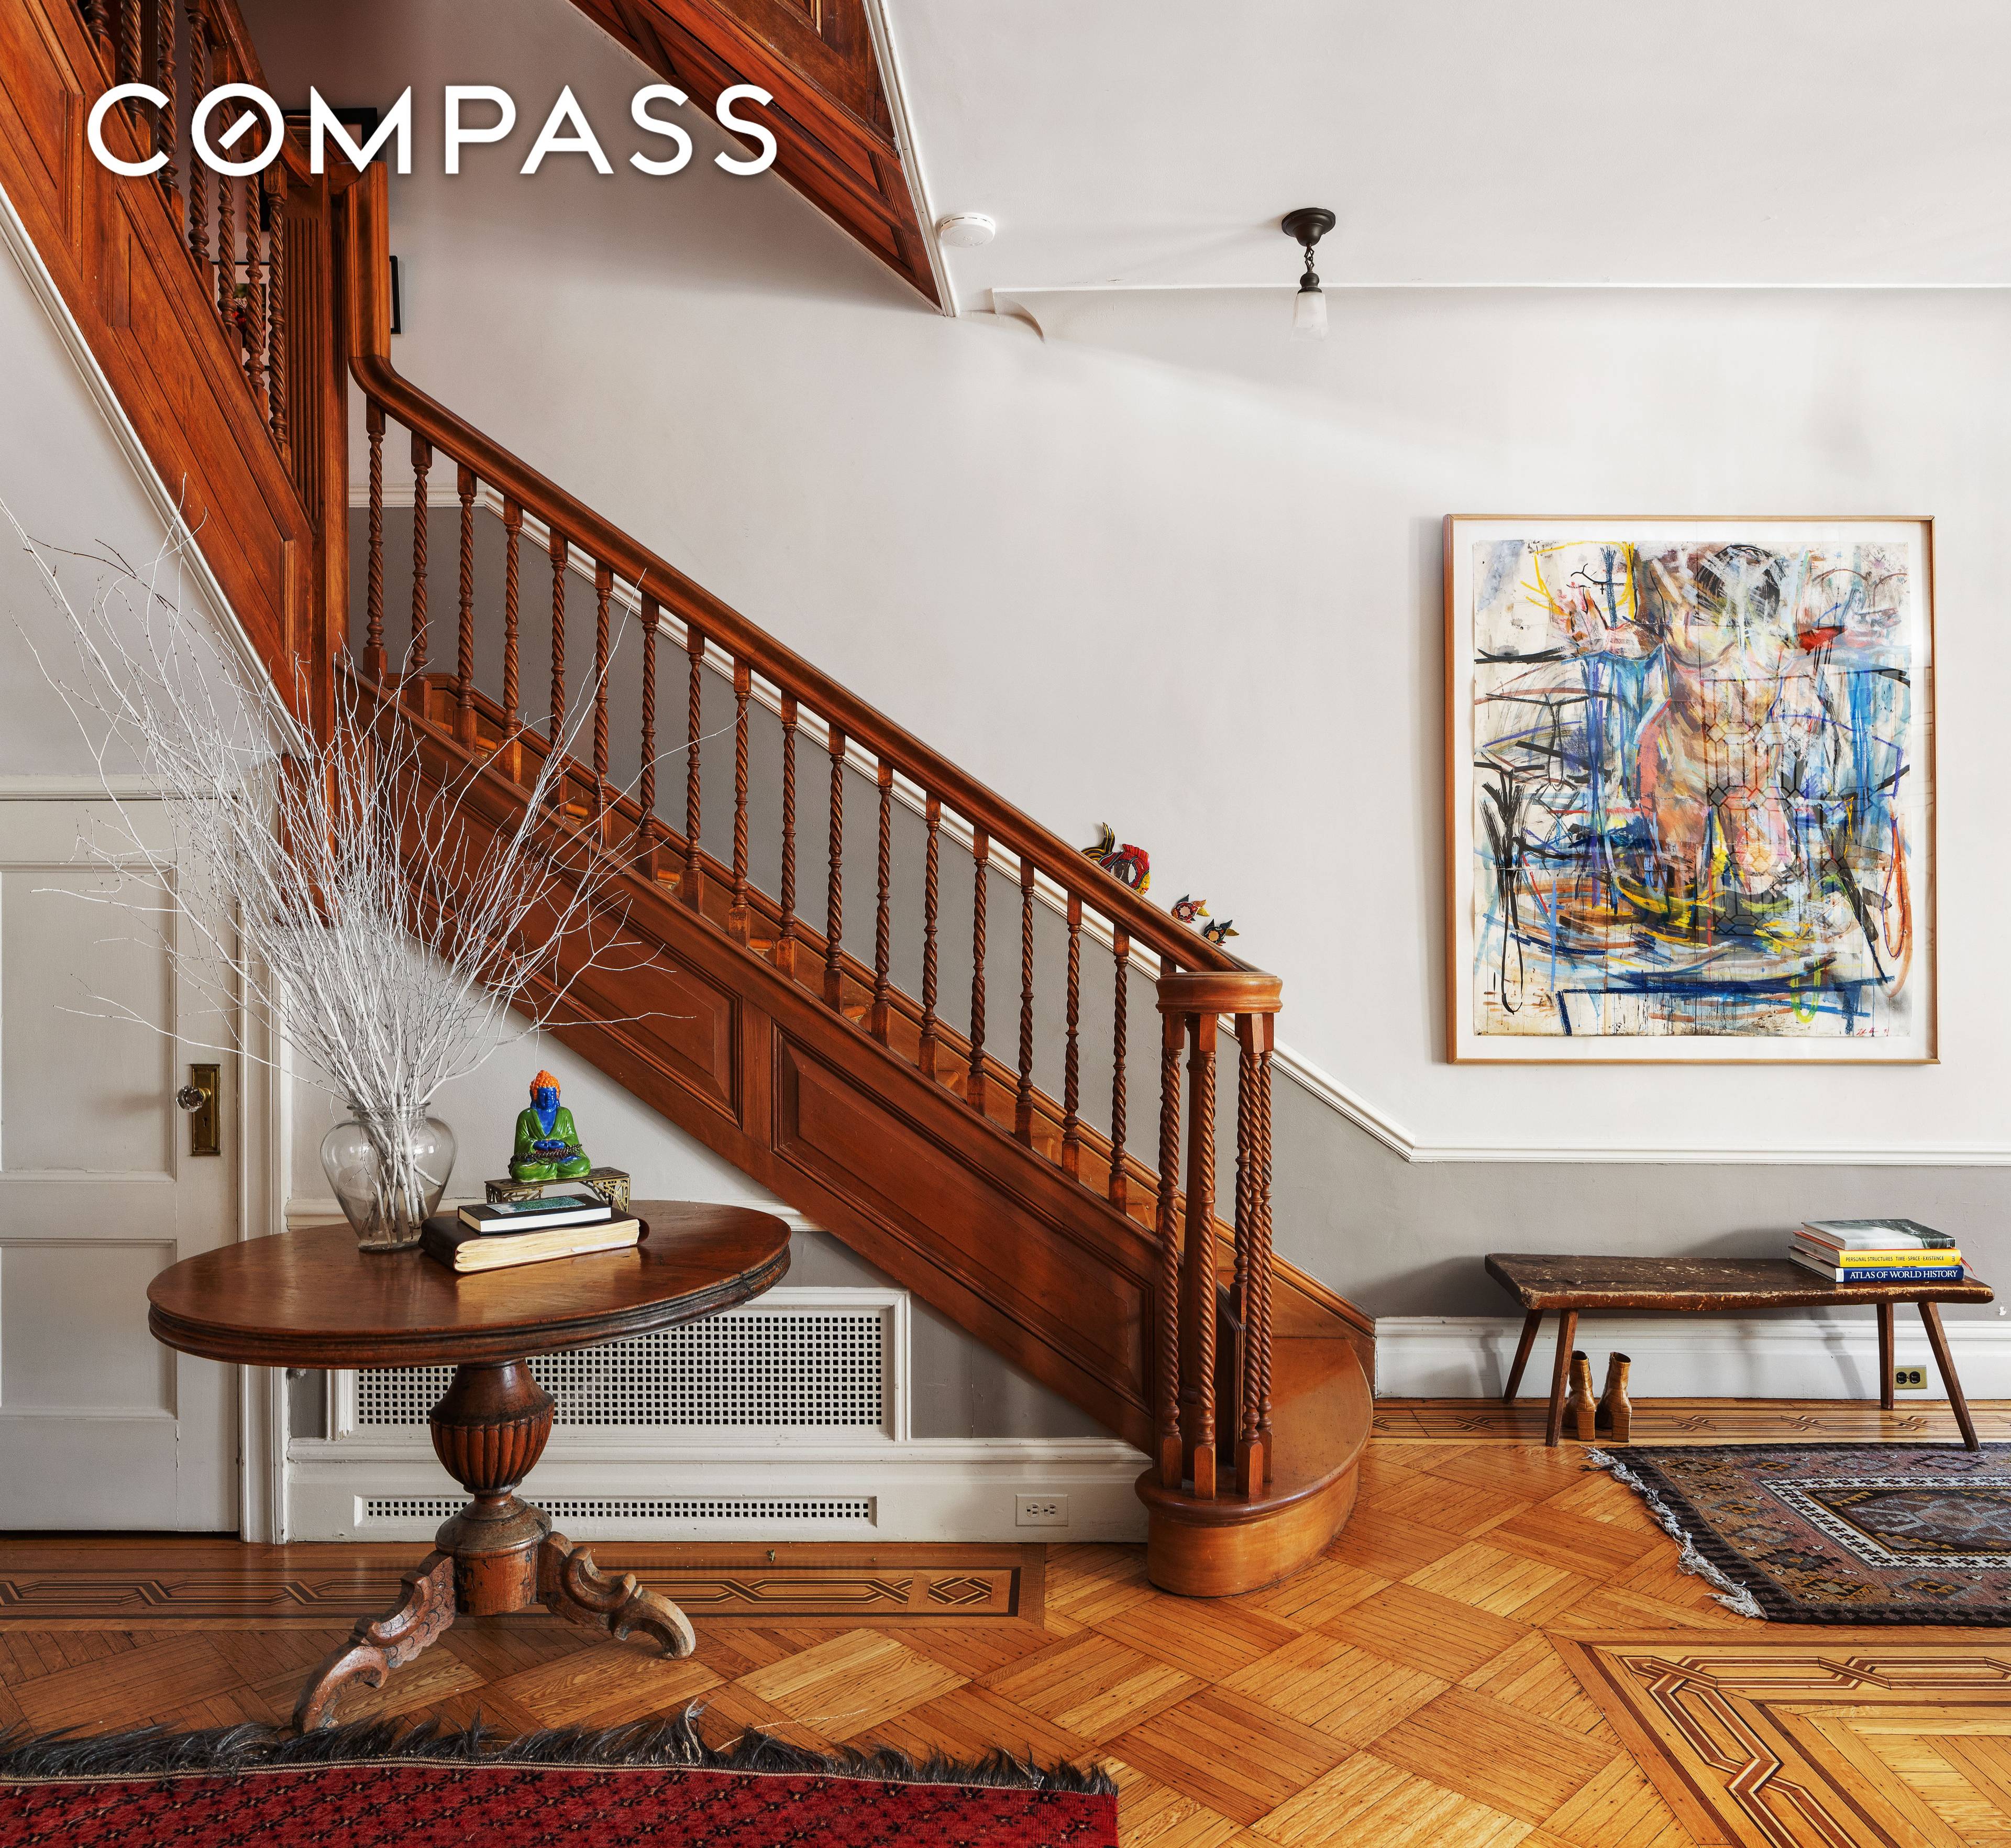 Nestled in the heart of Park Slope, Brooklyn, 605 2nd Street boasts a spacious 5, 416 sqft of interior and exterior living space, featuring 6 bedrooms and 2.